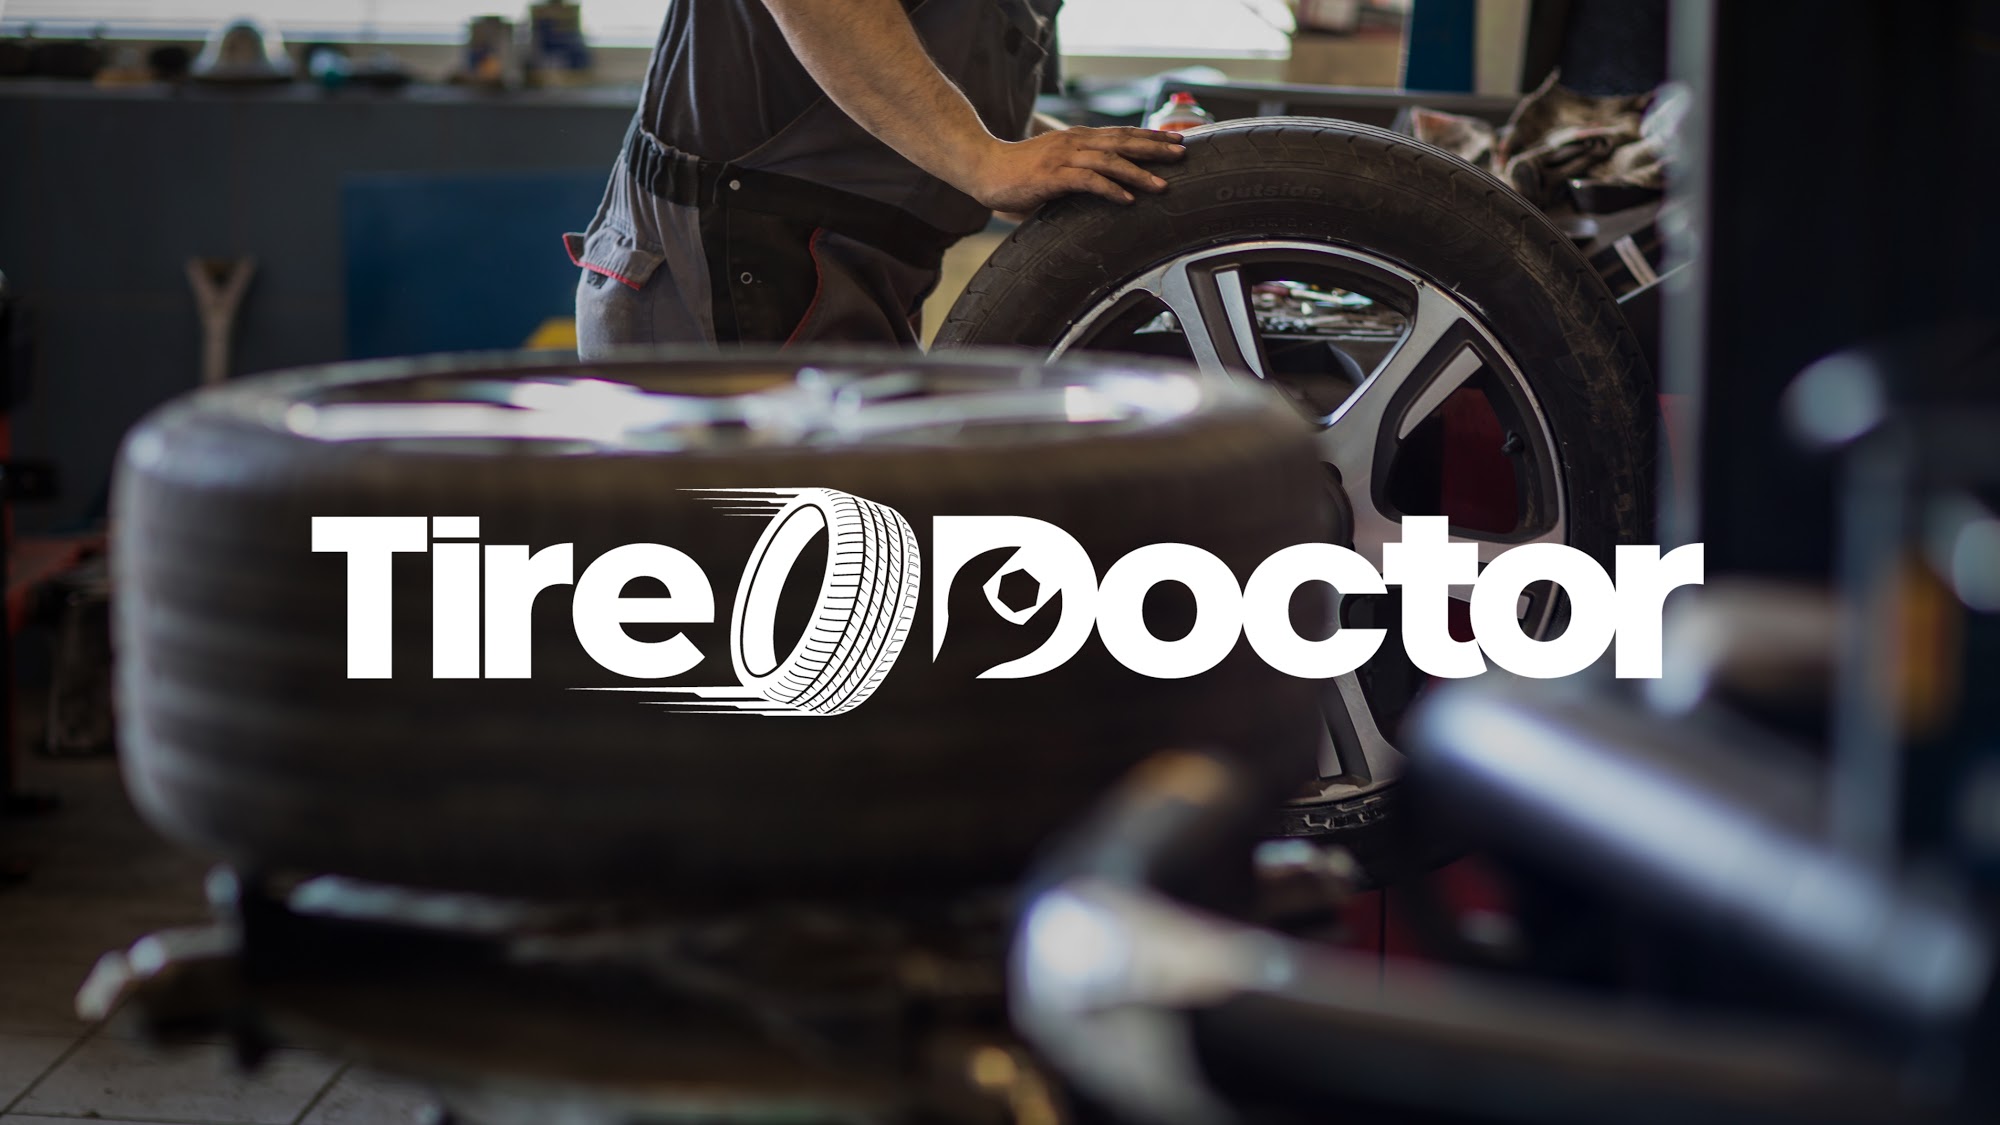 Wade Hampton Tire - A Tire Doctor Company - Used Tires